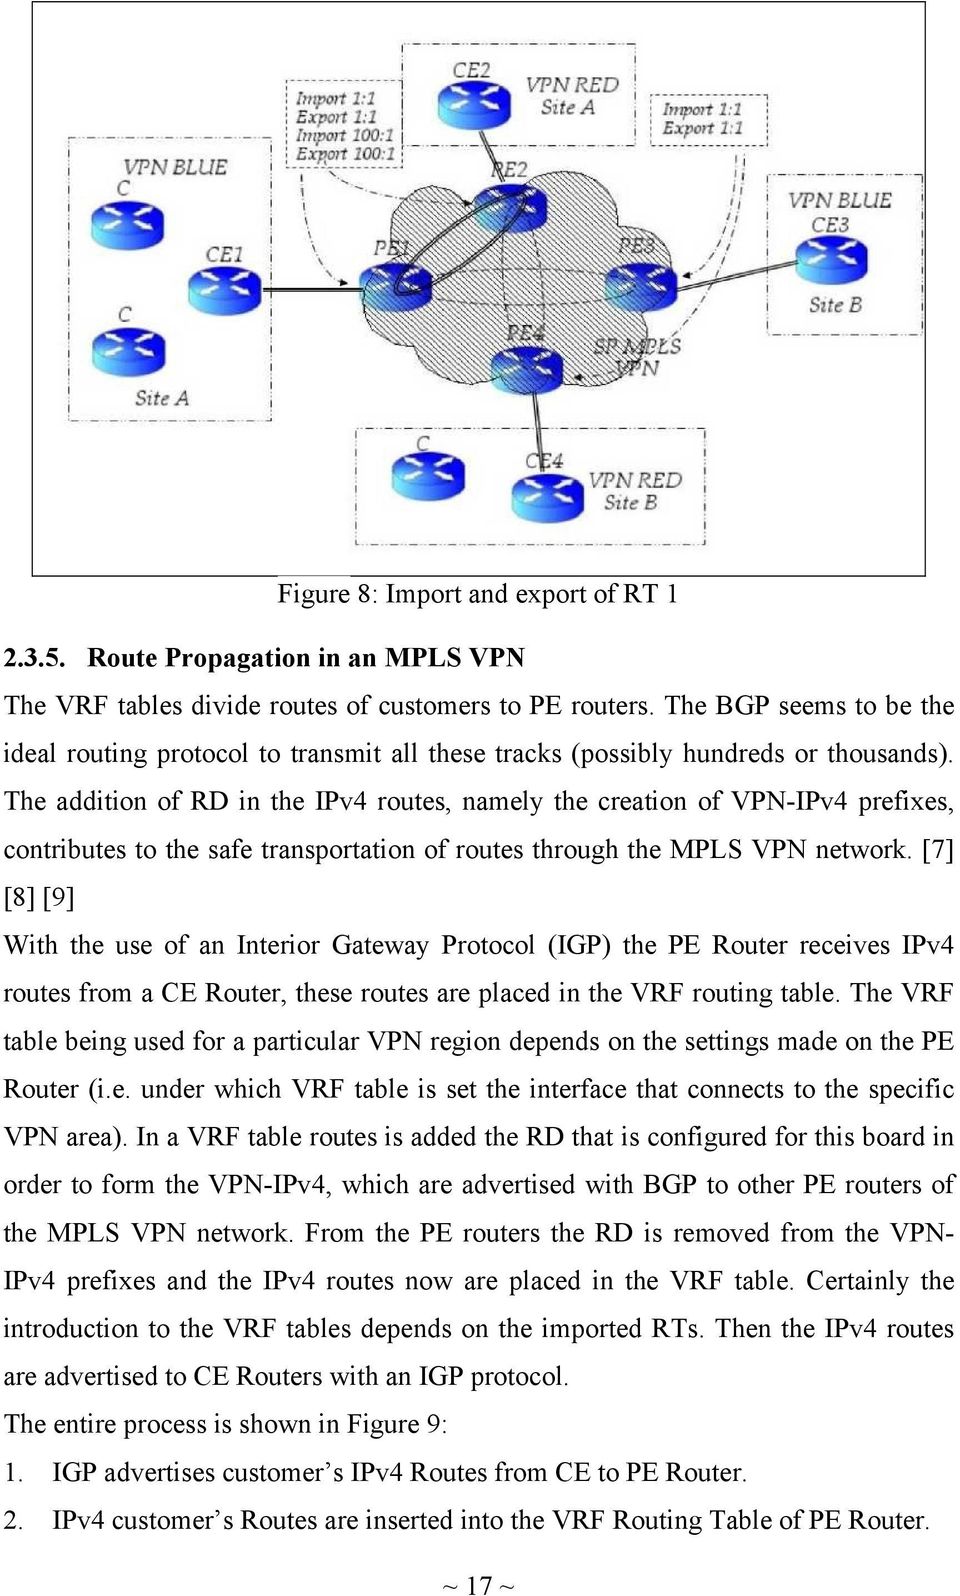 The addition of RD in the IPv4 routes, namely the creation of VPN-IPv4 prefixes, contributes to the safe transportation of routes through the MPLS VPN network.